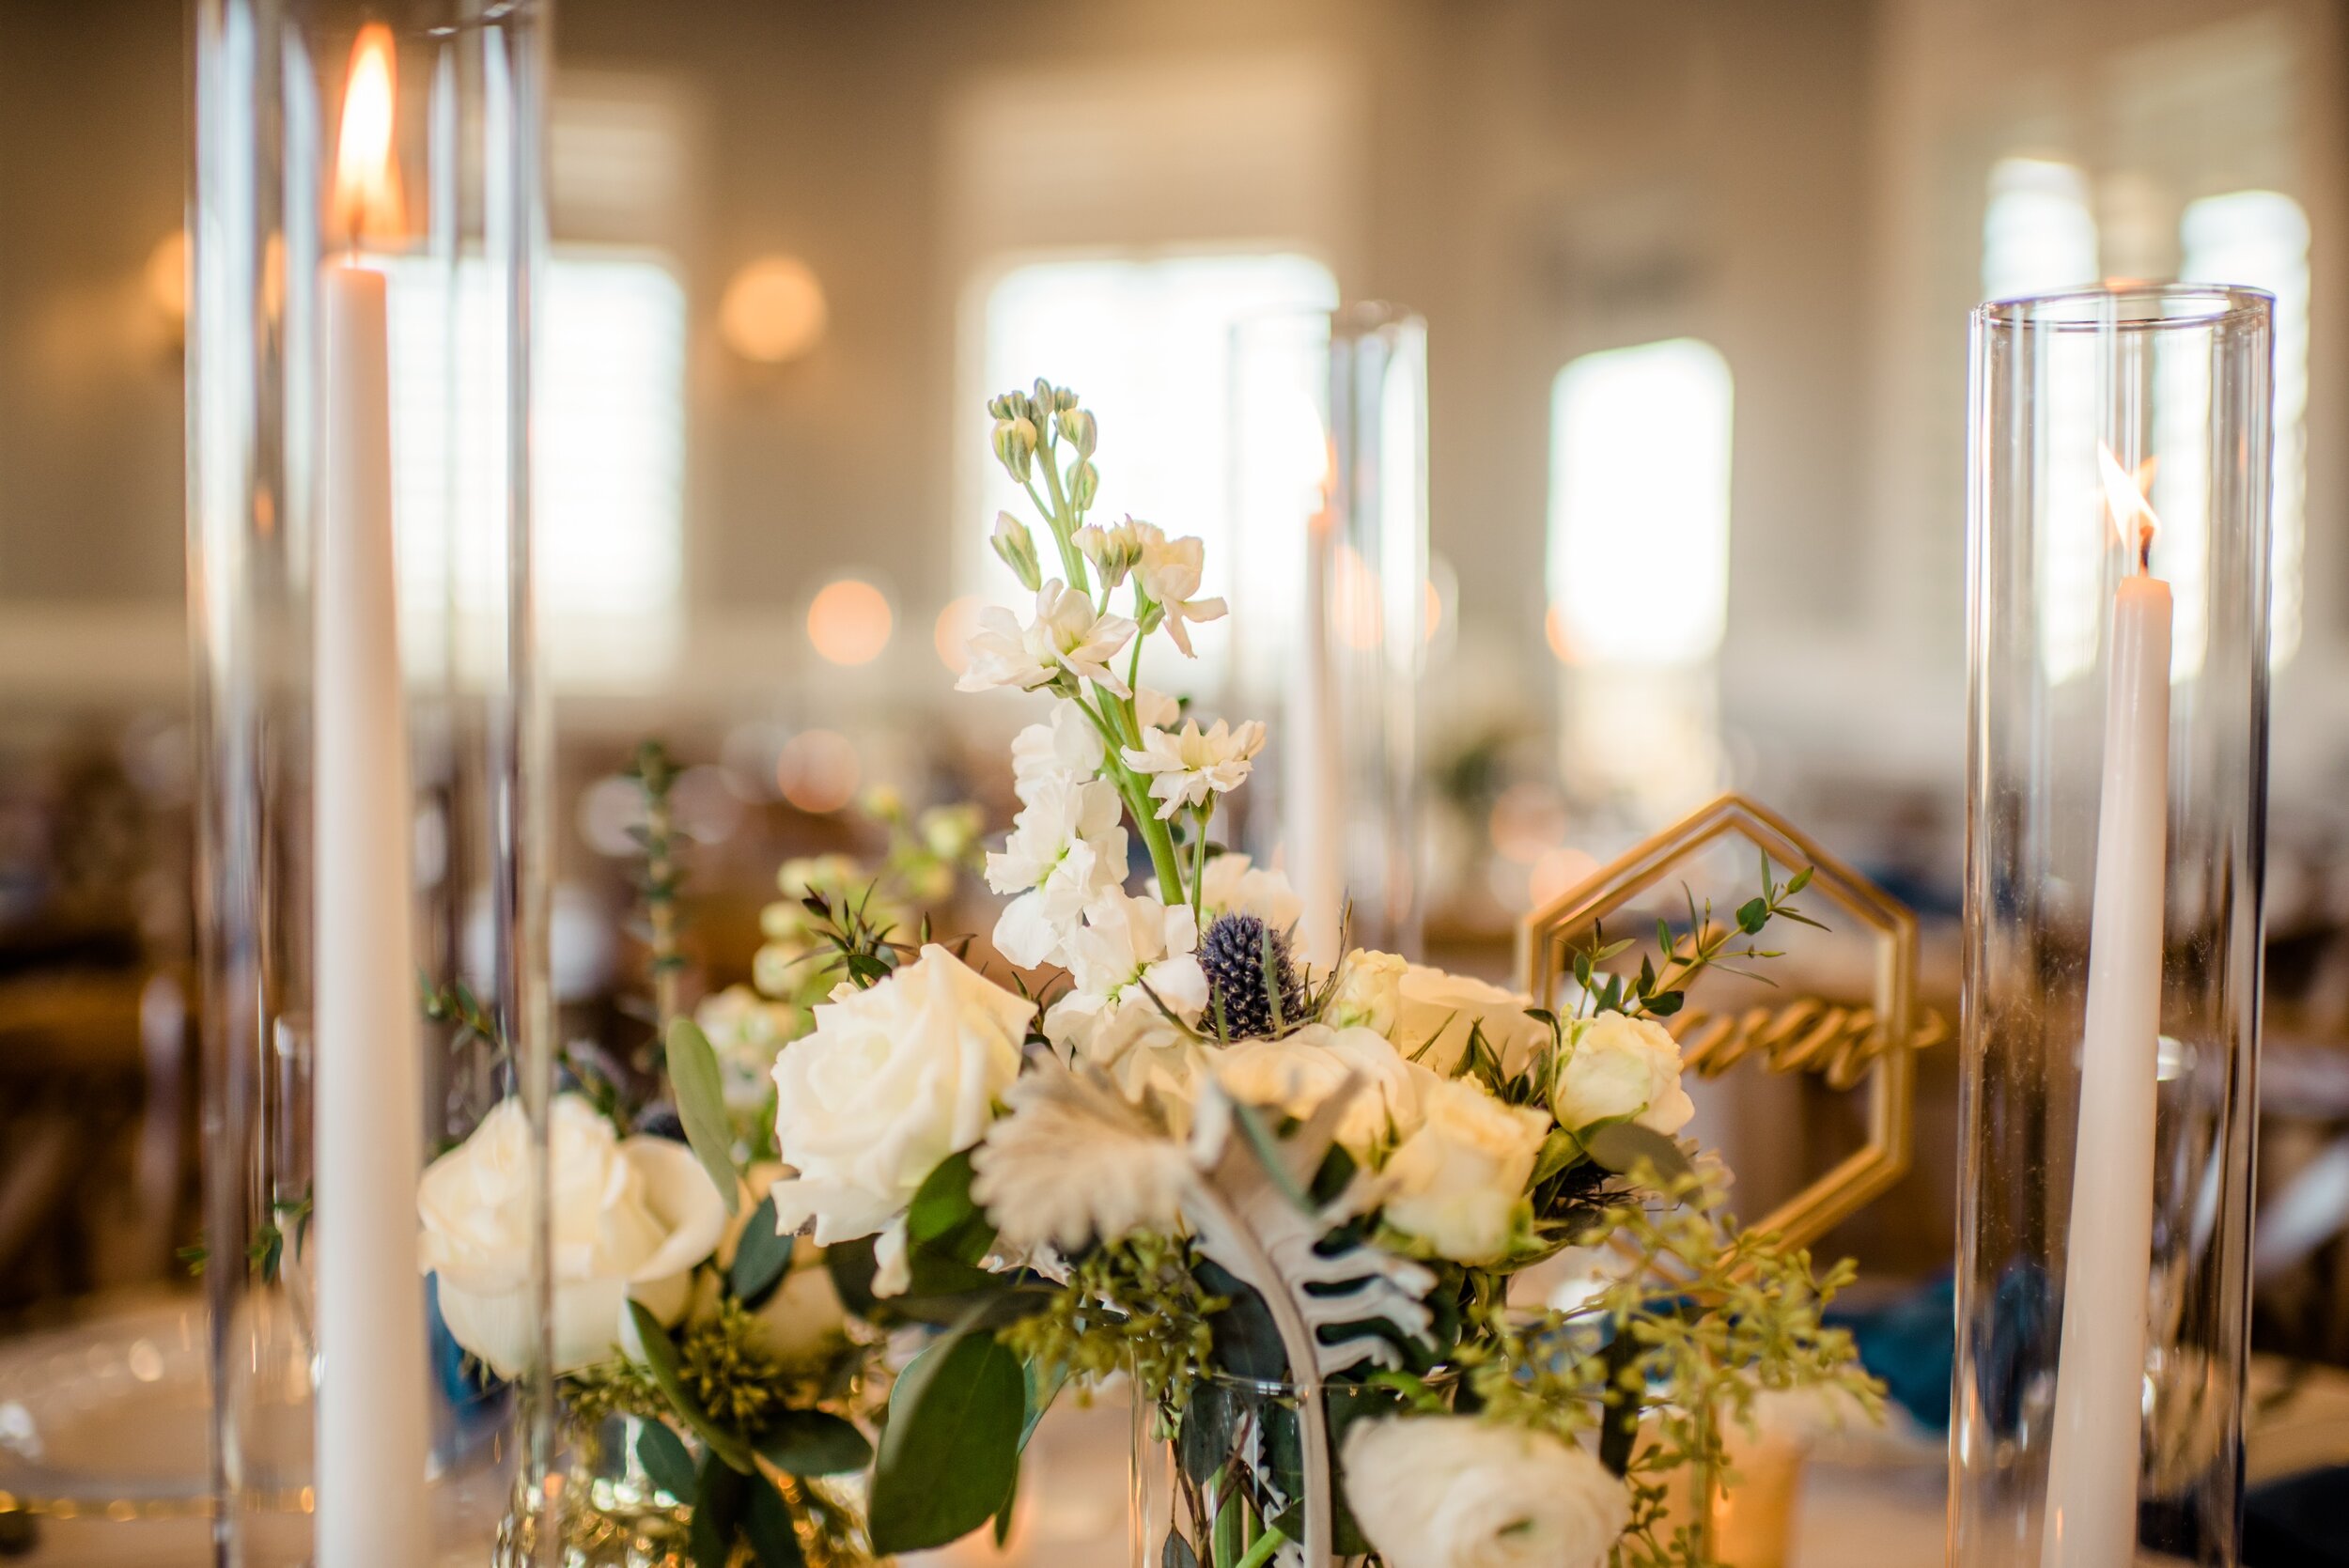 Textured Centerpieces with Blue Napkins and Gold Accent